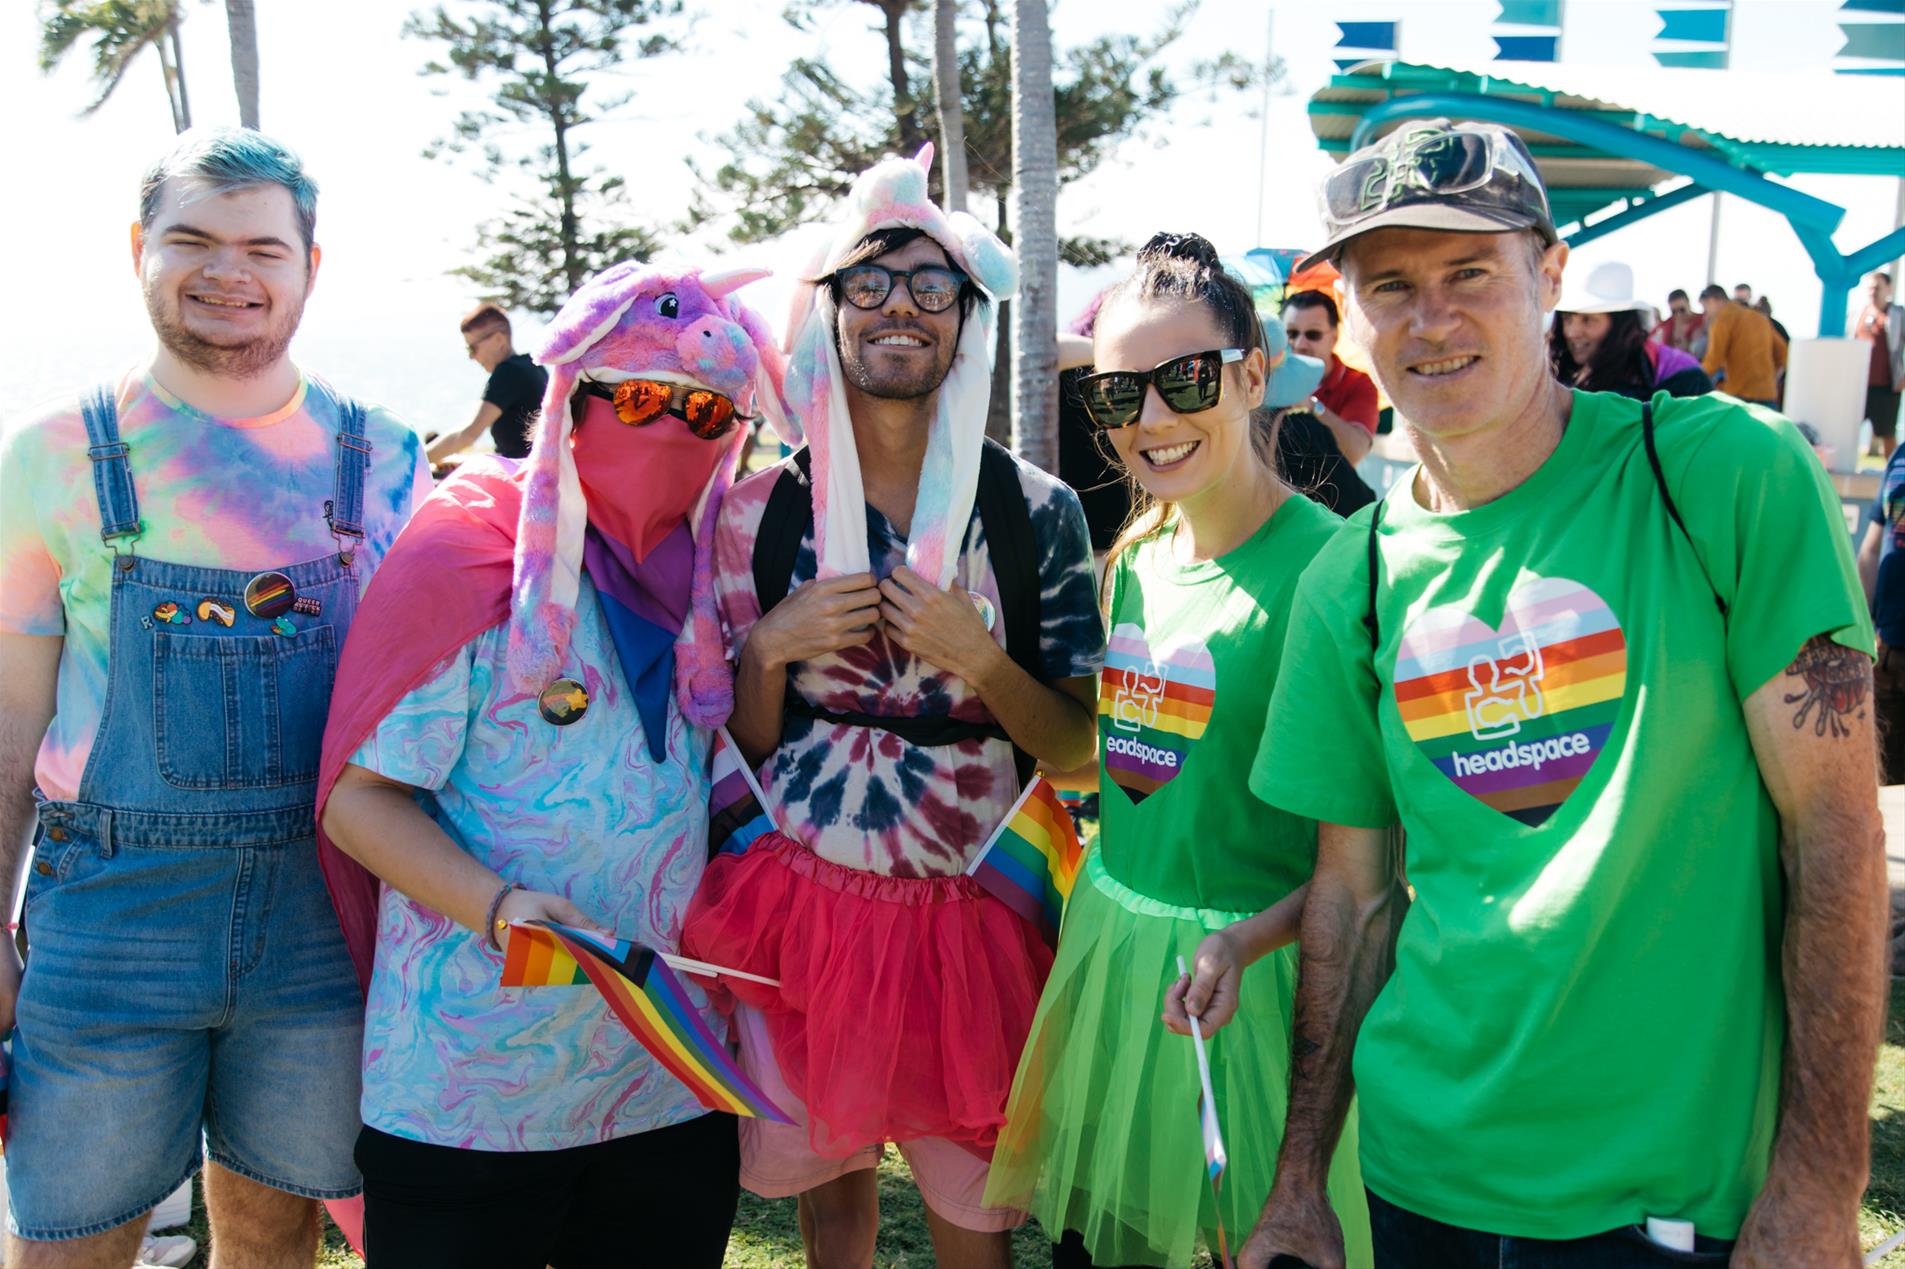 A group of people wearing colourful clothes posing for a photo.